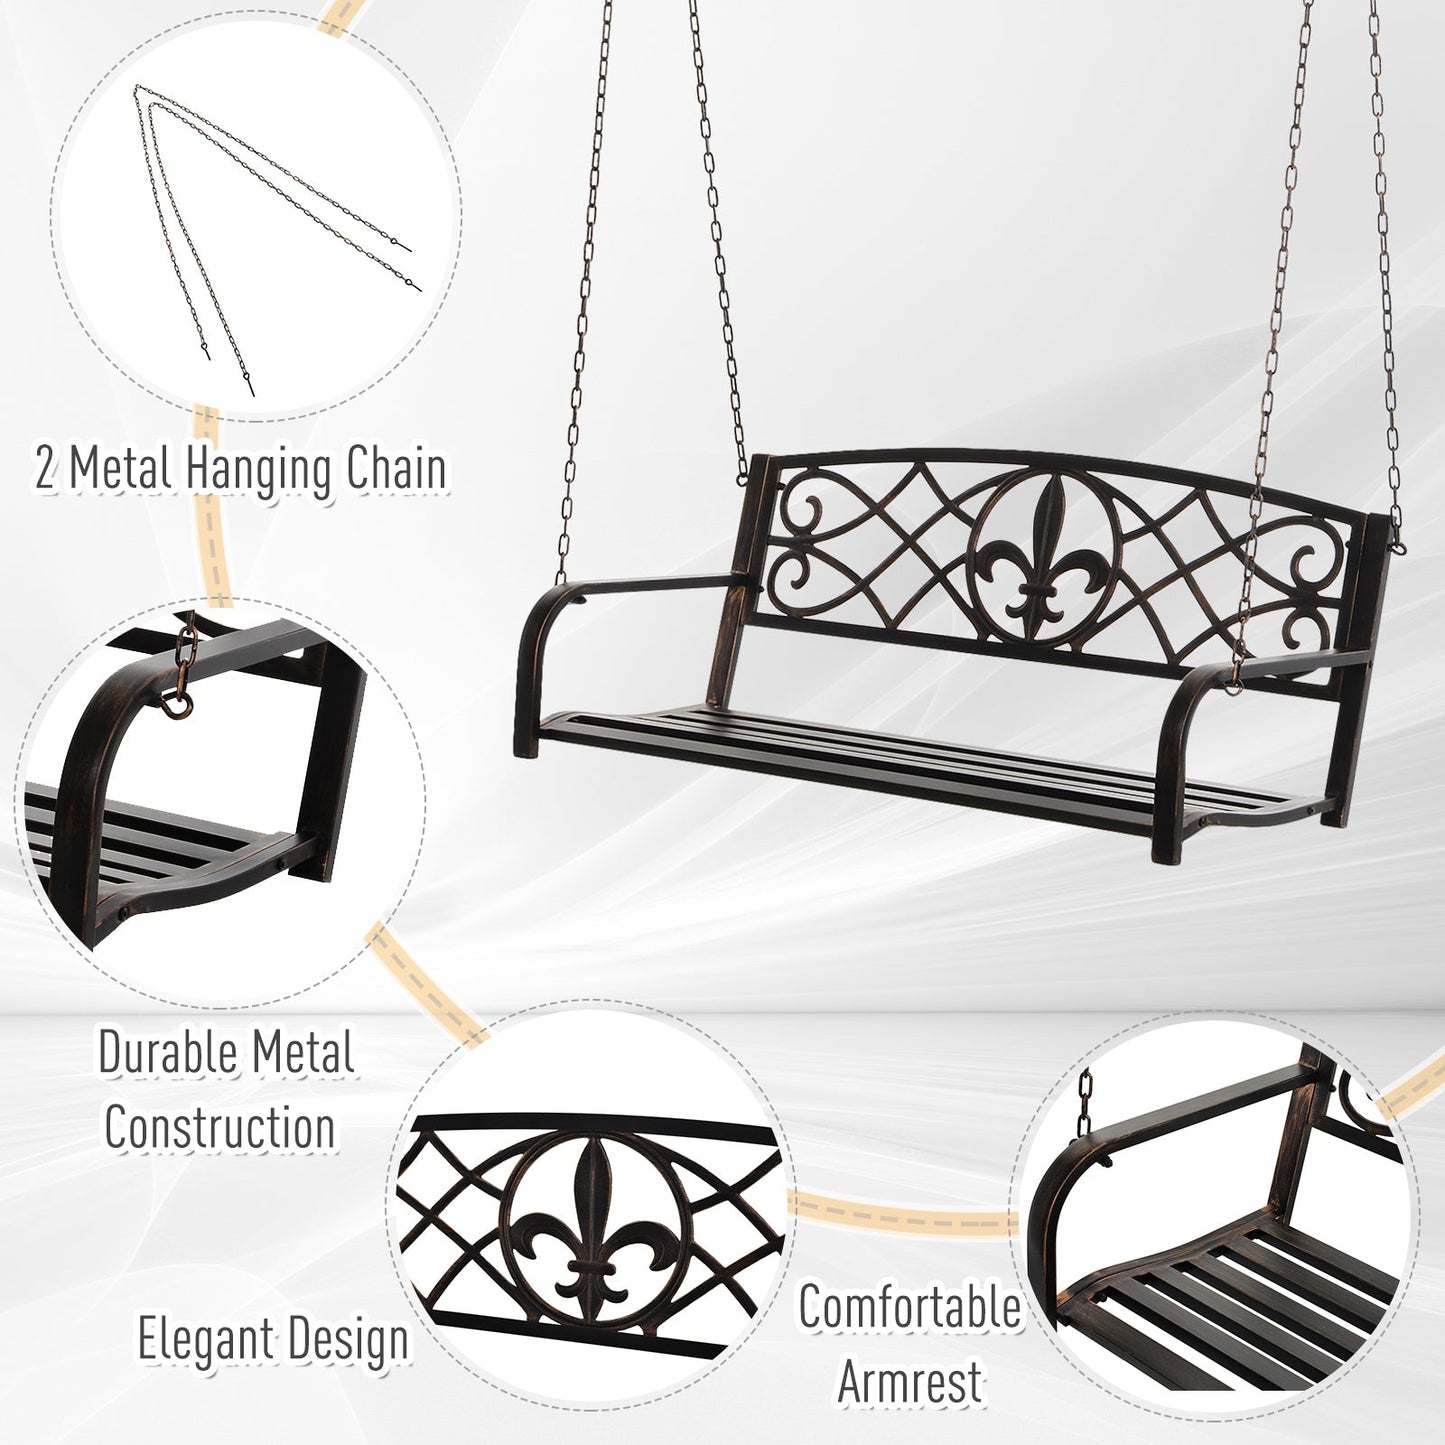 Outdoor and Garden-Steel Hanging Porch Swing, Fleur-de-Lis Design Outdoor Swing Seat Bench with Chains for the Yard, Deck, 485 LBS Weight Capacity, Bronze - Outdoor Style Company